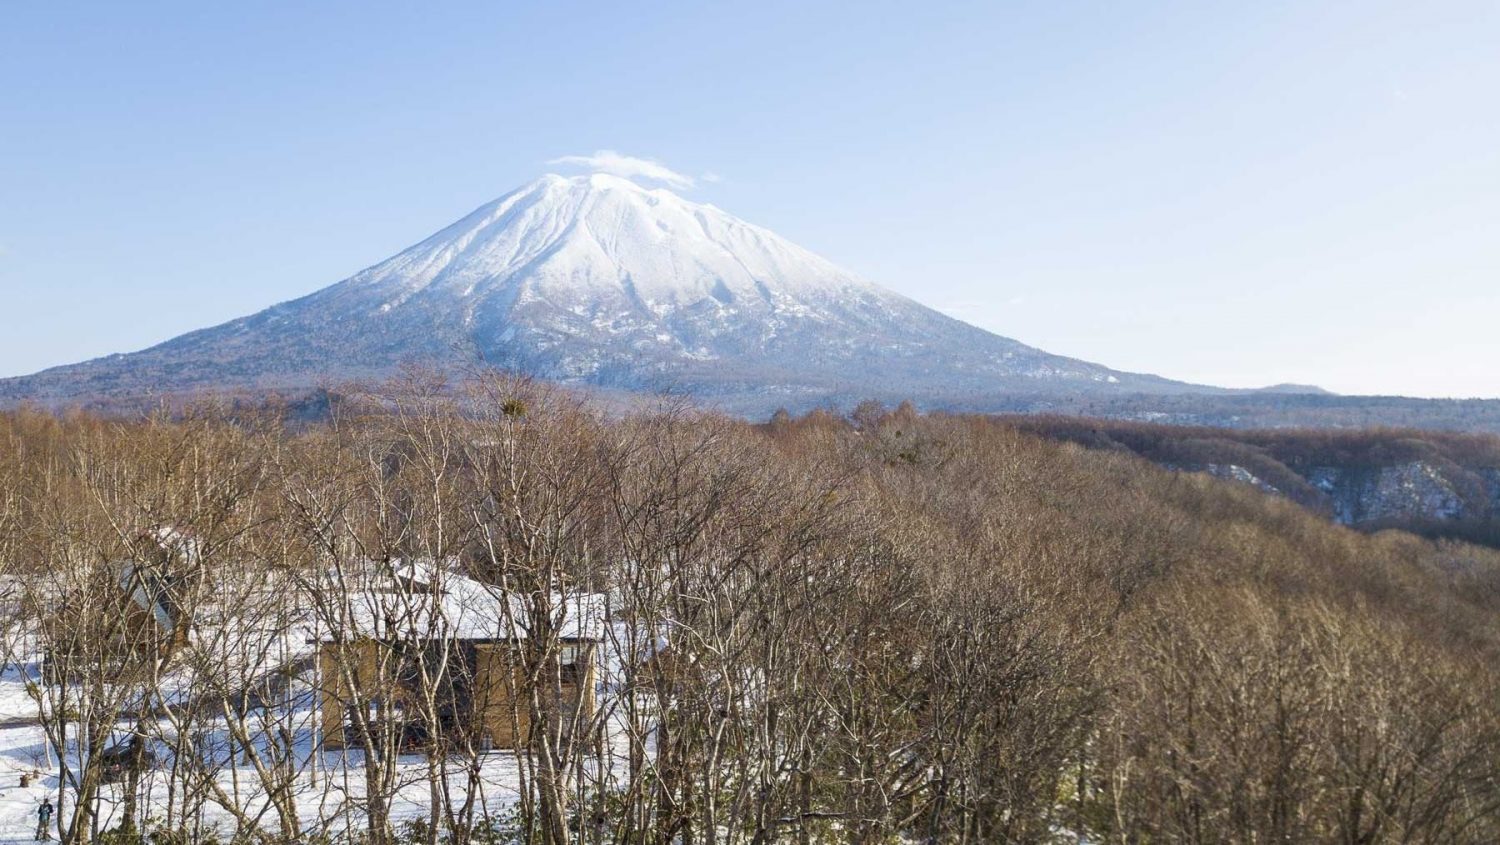 36 Hours in Niseko - The New York Times